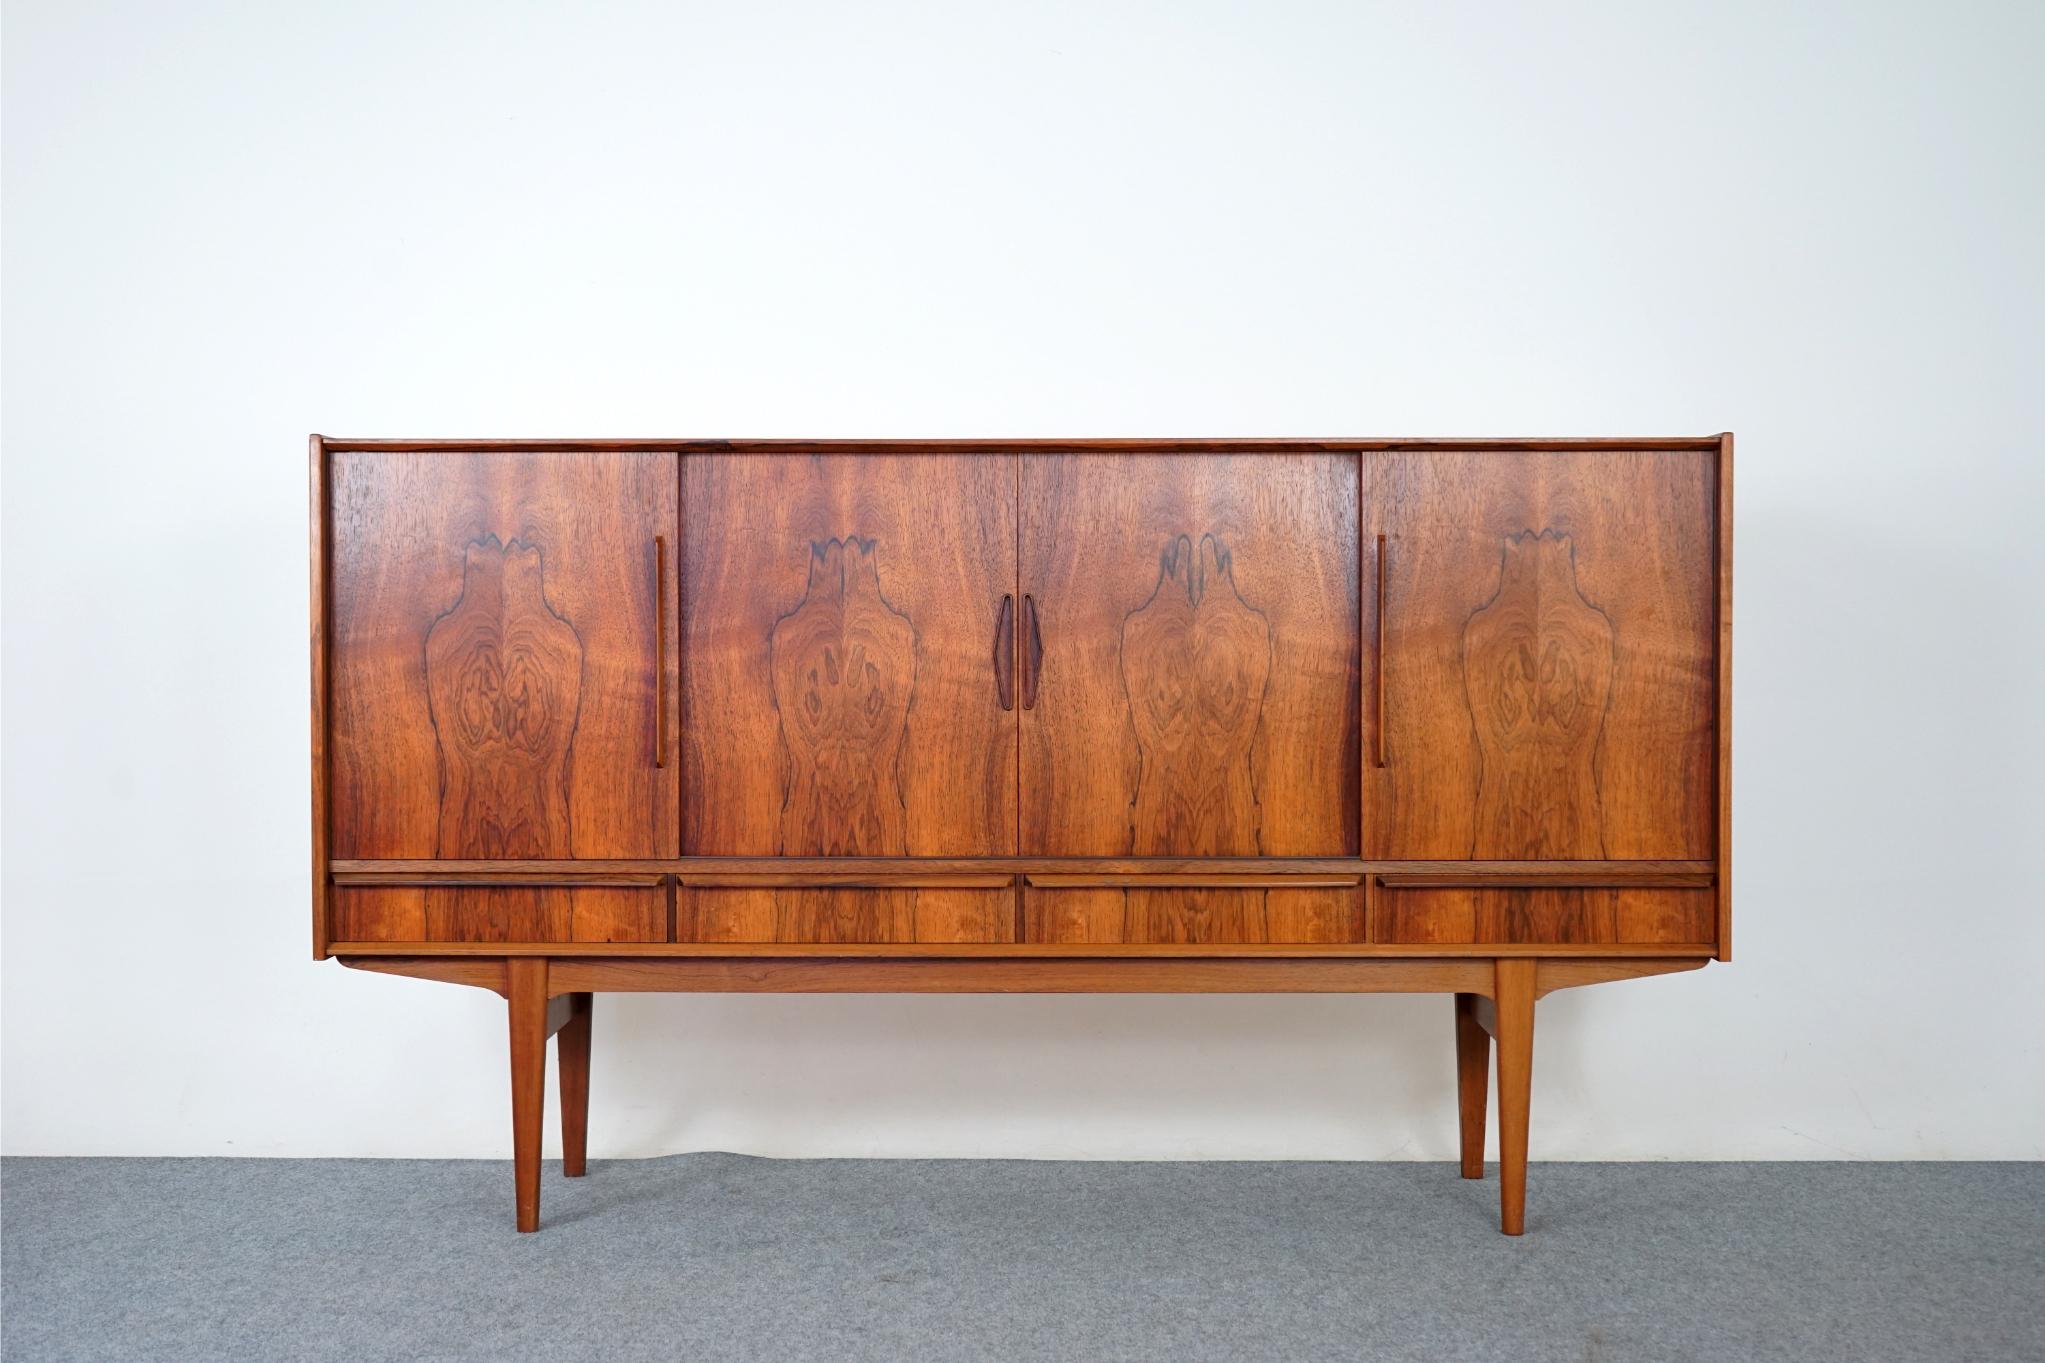 Rosewood sideboard, circa 1960's. Clean, simple lined design highlights the exceptional book-matched veneer throughout. Sliding doors and exterior drawers offers ample storage to hide away clutter, show off your favourite things. Interior bays are